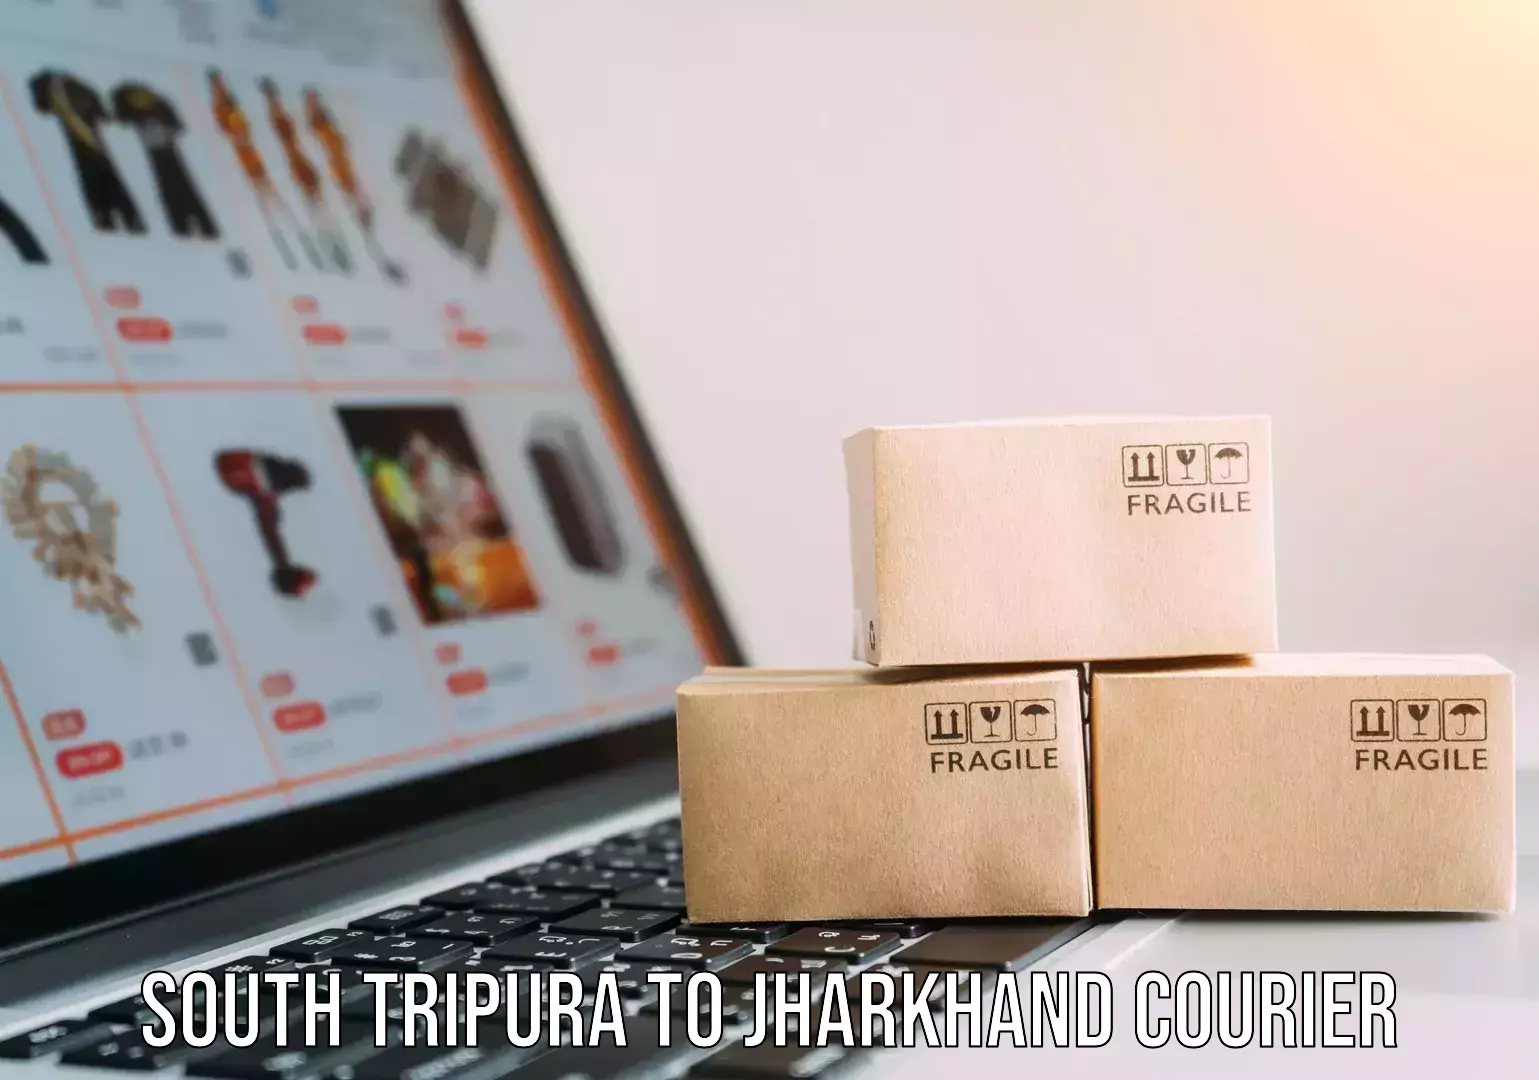 Same day shipping in South Tripura to Jharkhand